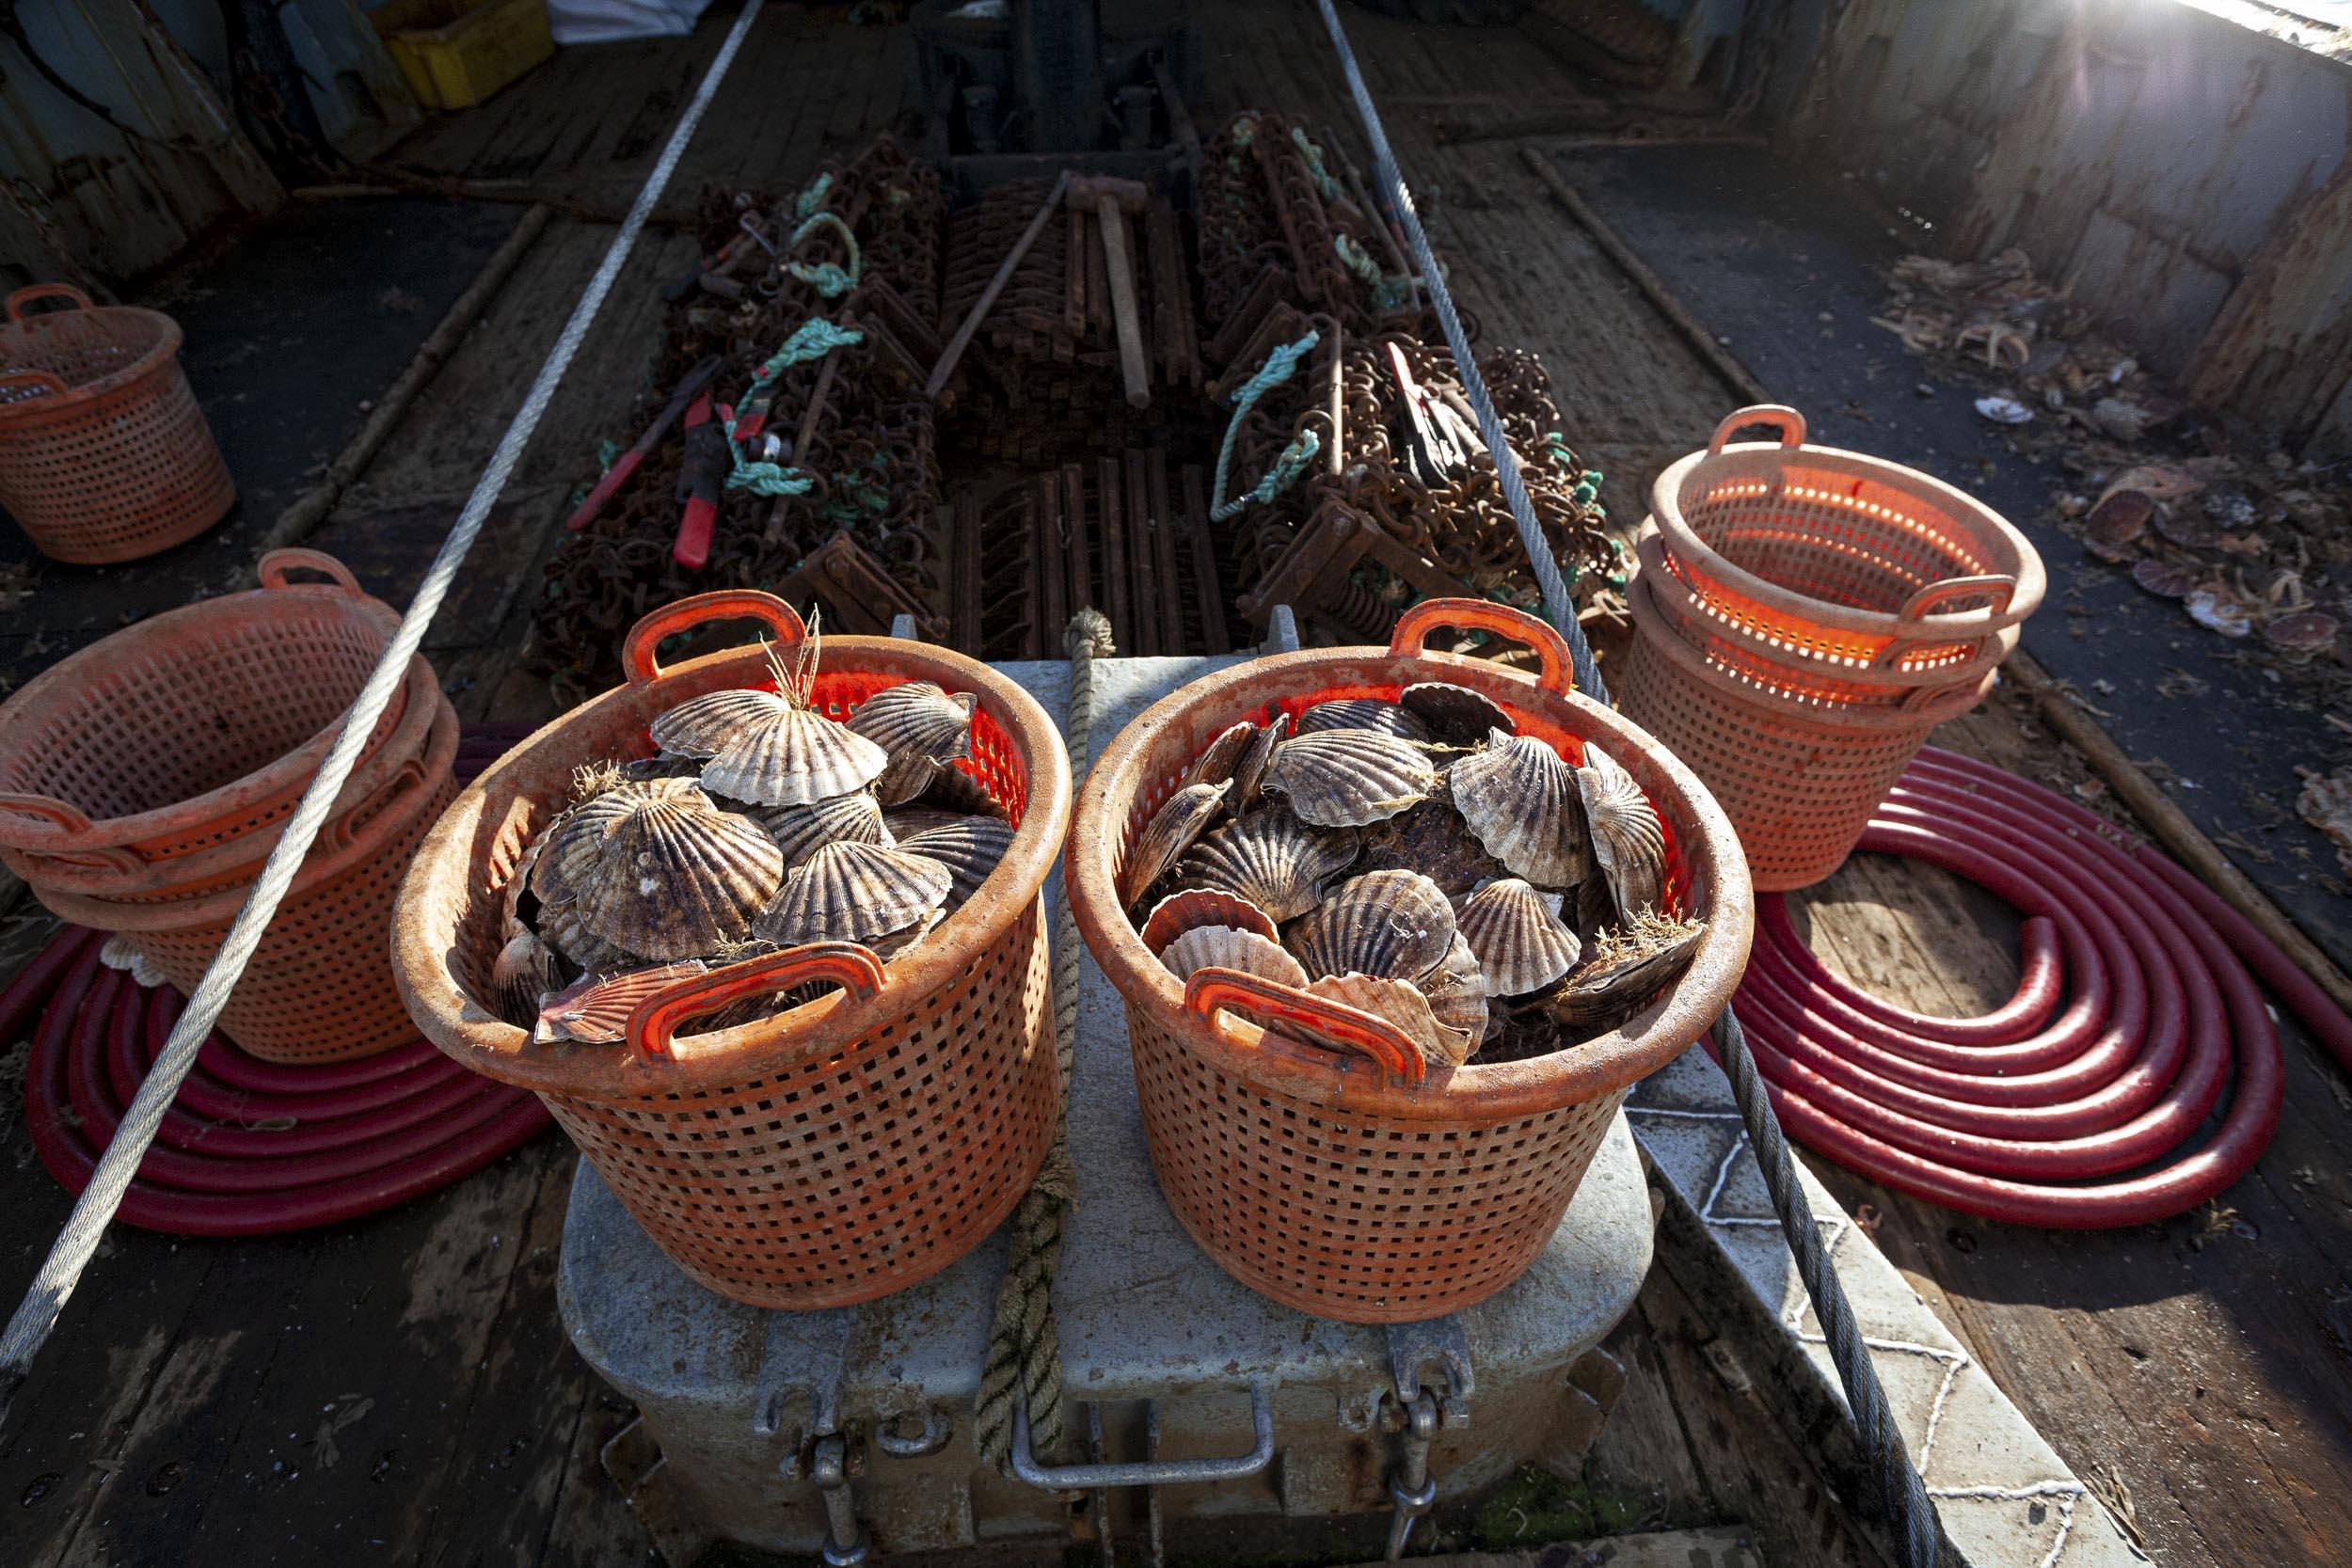 Buckets full of scallops sitting on a fishing trawler. Many other containers and nets are scattered around.